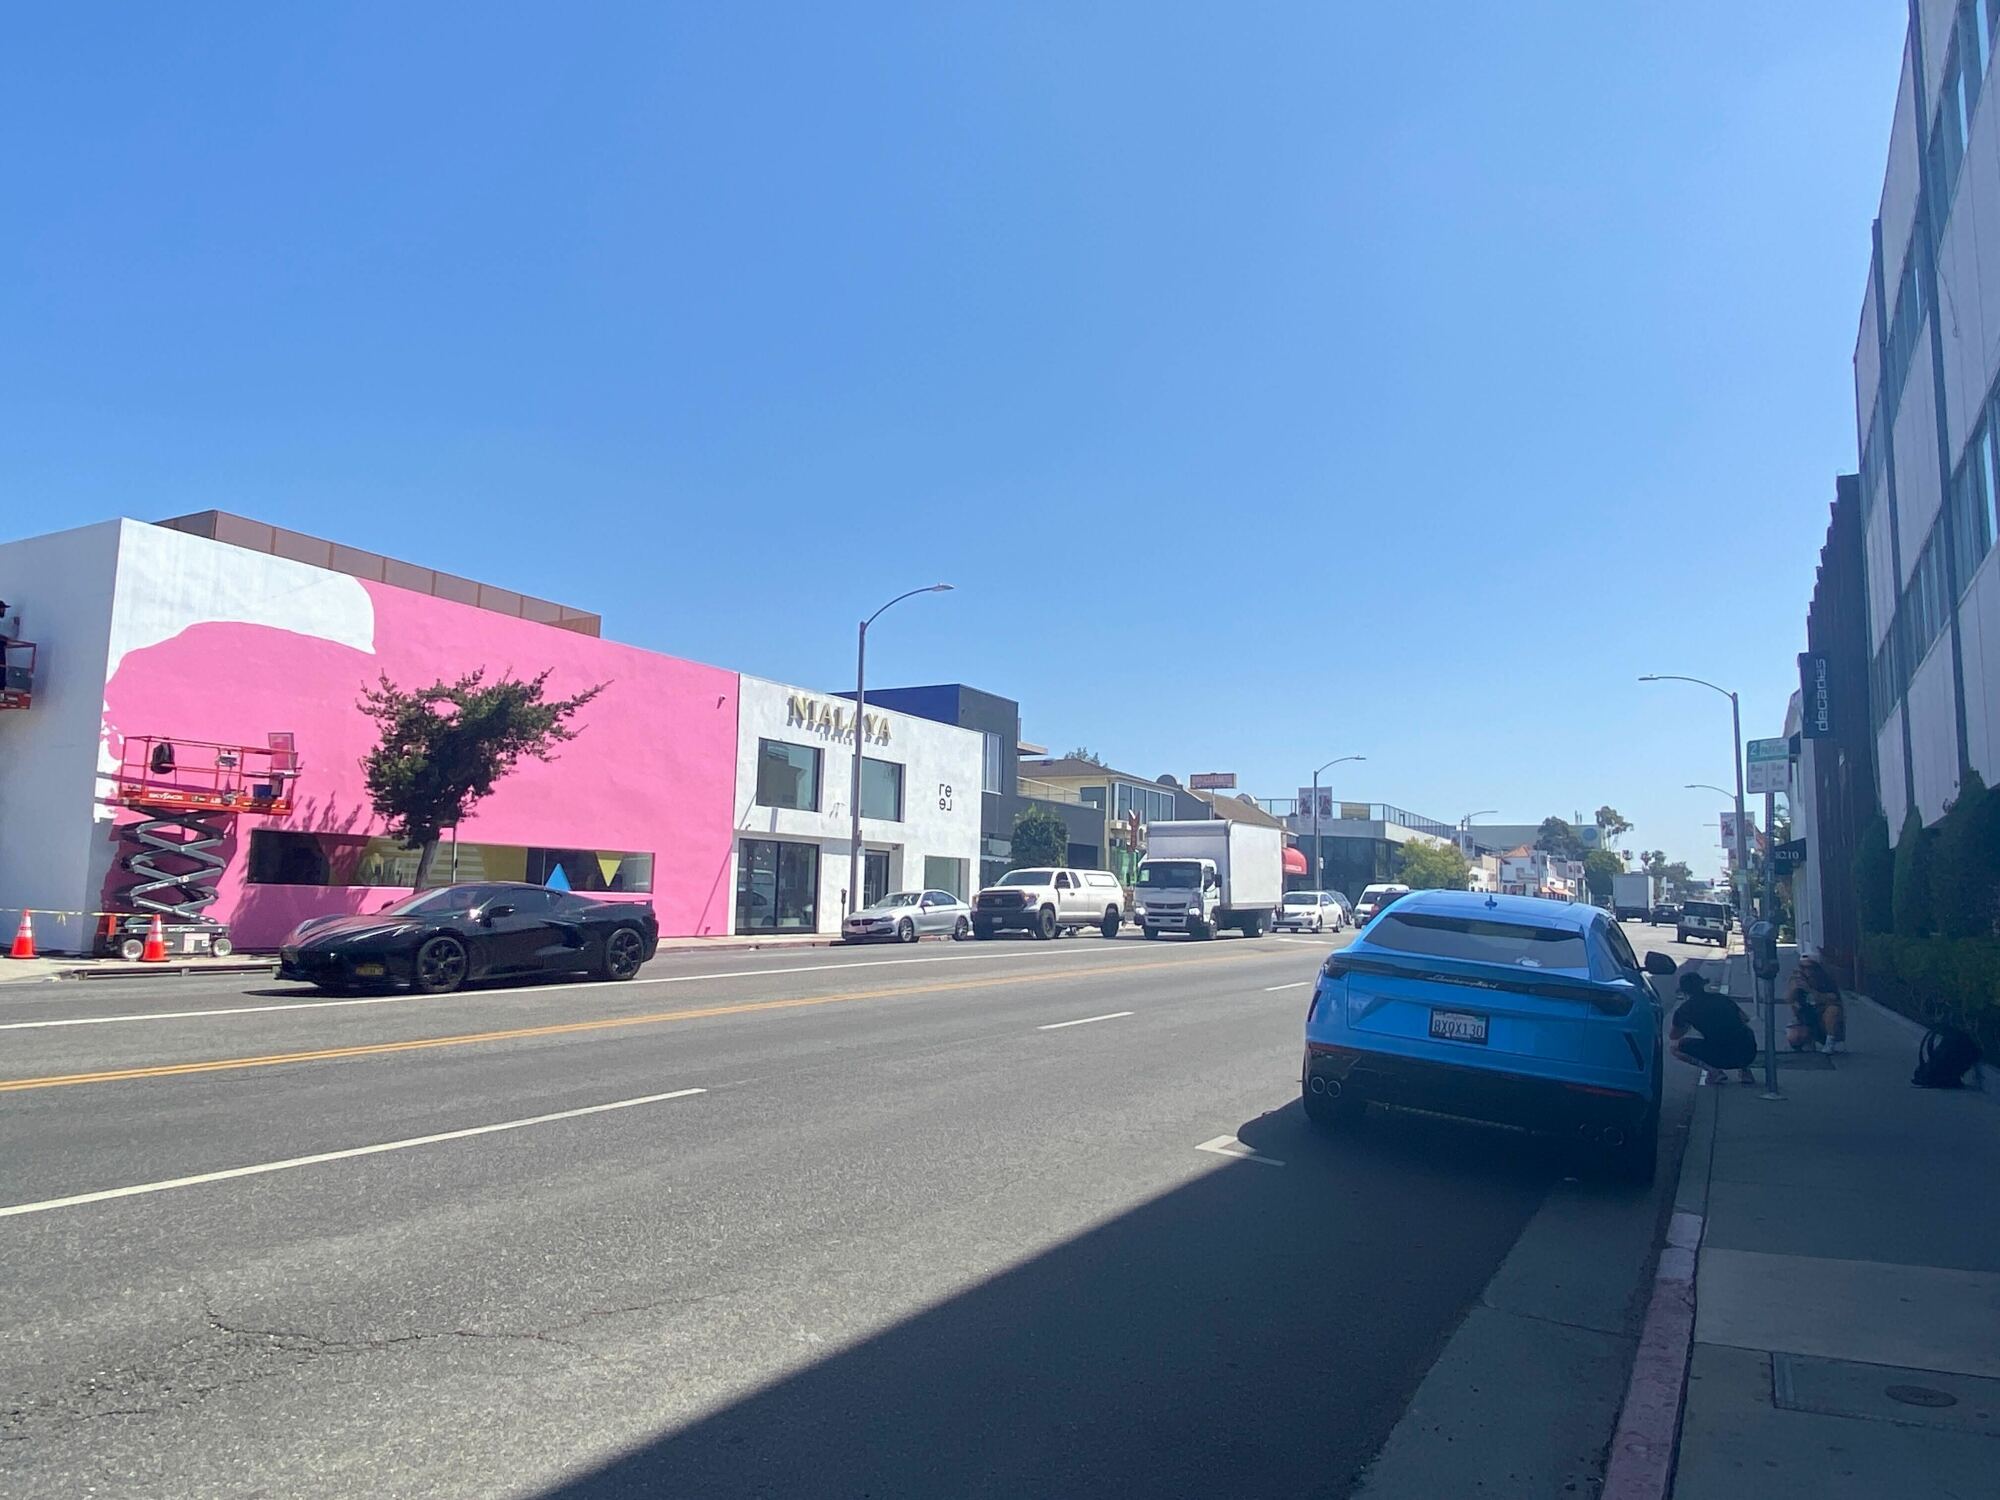 A pink building on the left, and a blue Lamborghini on the right, with people posing in front of the car.